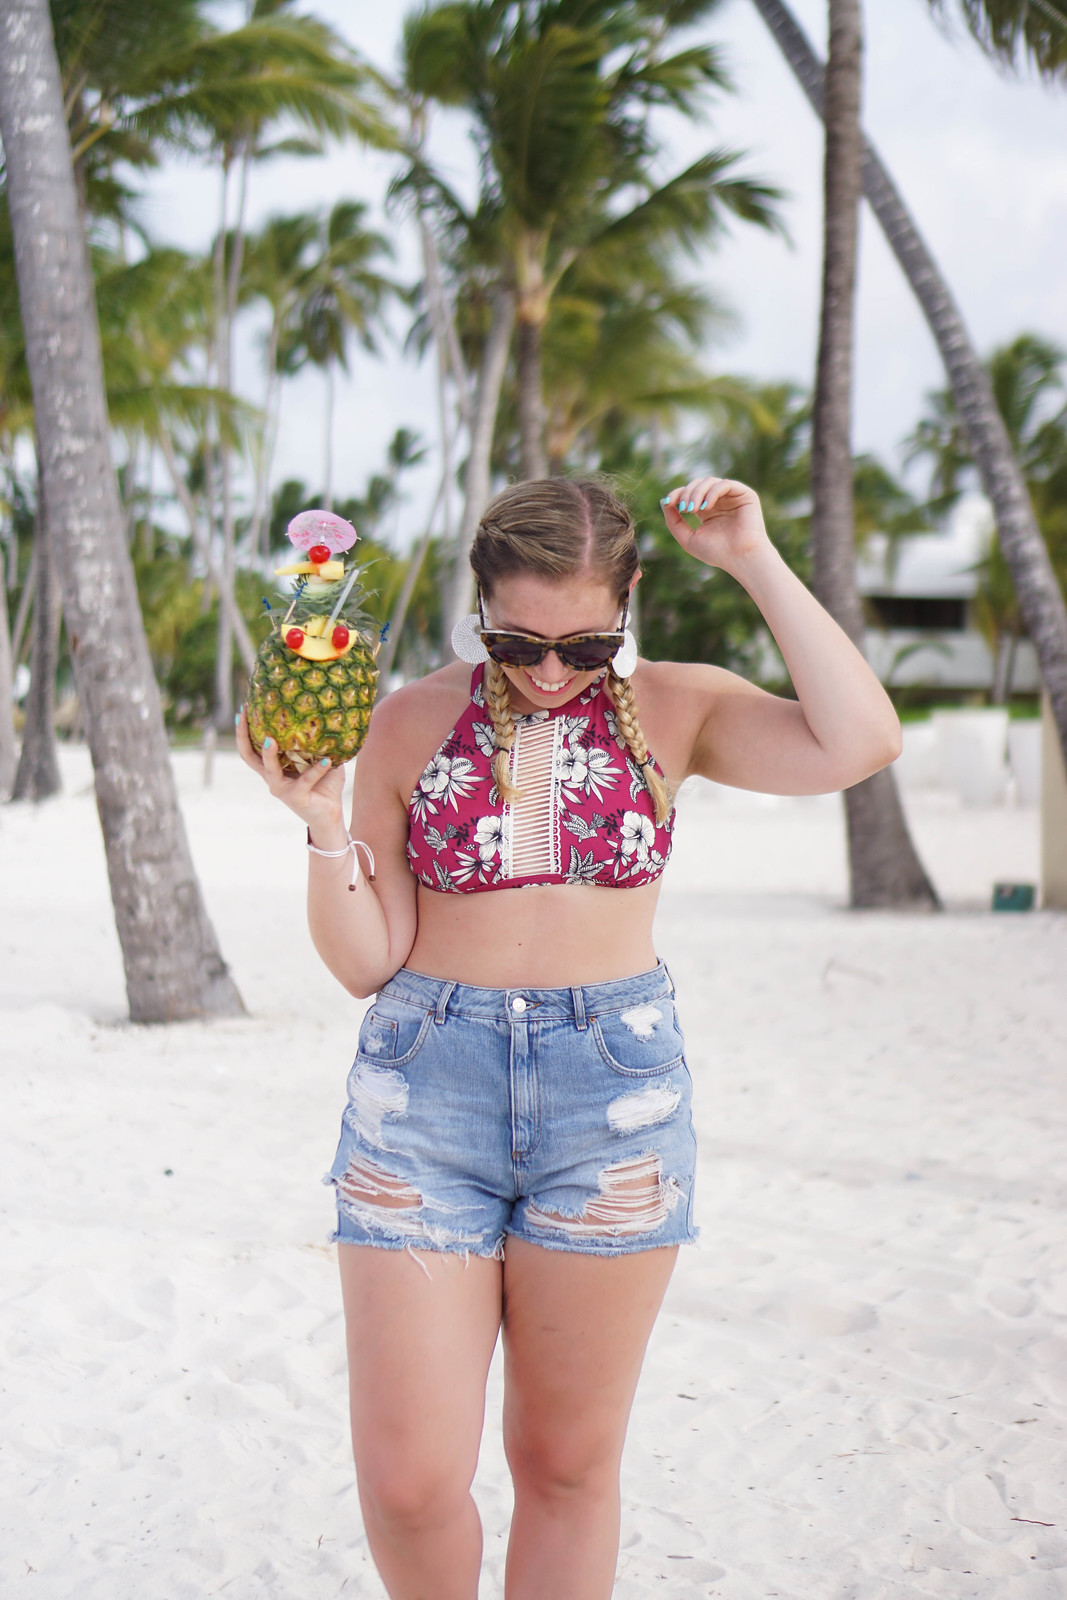 Pigtail Braids Floral High Neck Bikini Mom Jean Shorts Pineapple Drink Tropical Vacation Outfit Punta Cana Holiday Summer Palm Trees Beach